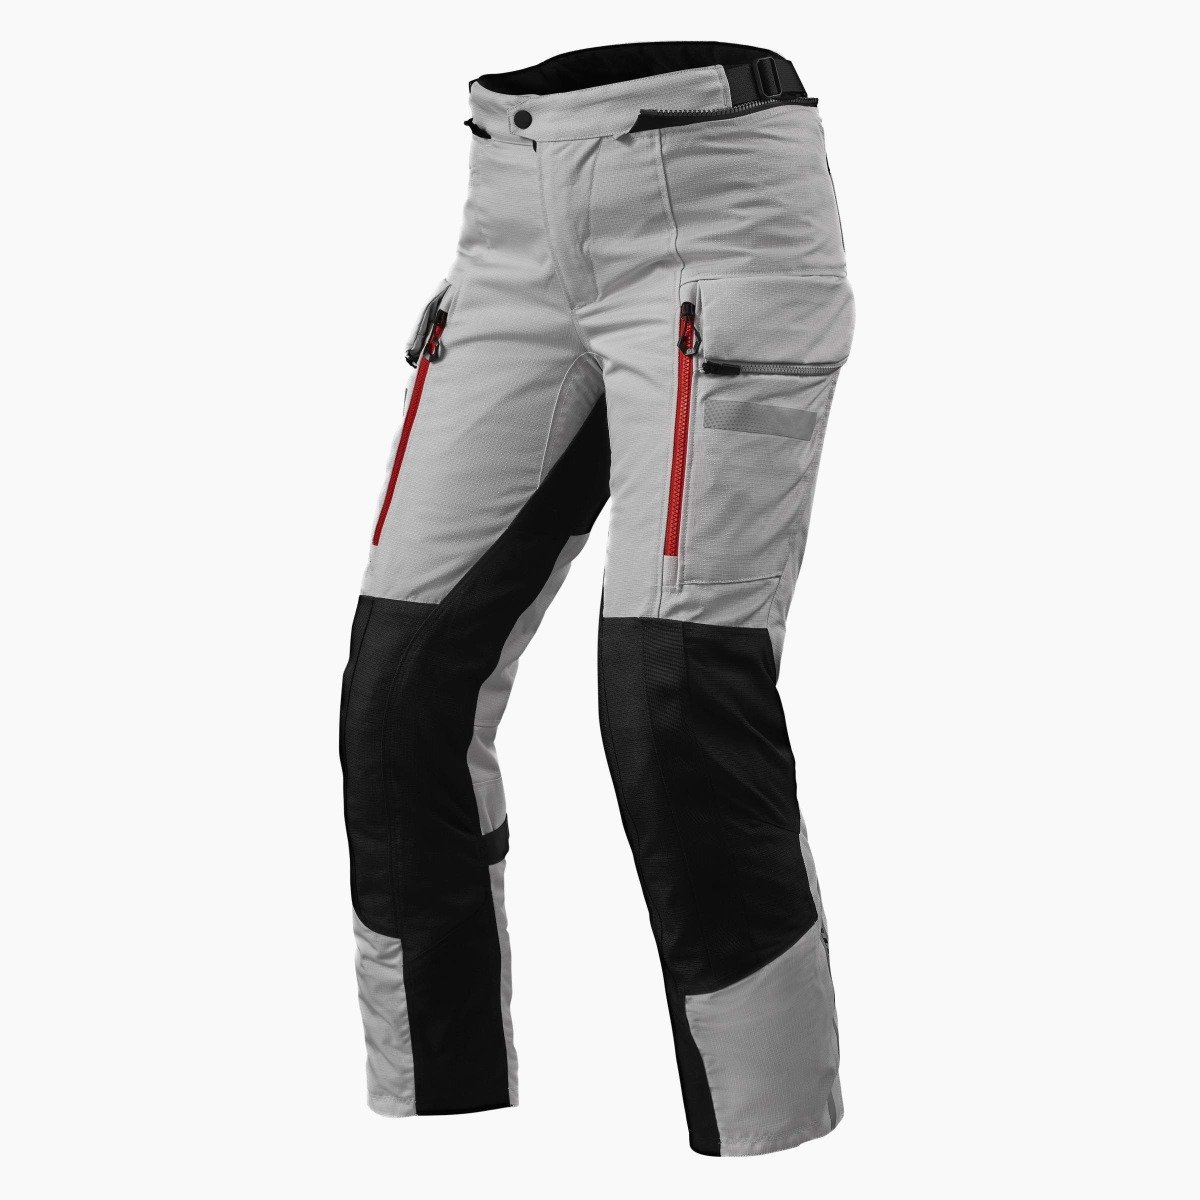 Image of REV'IT! Sand 4 H2O Ladies Short Silver Black Motorcycle Pants Size 42 ID 8700001316187